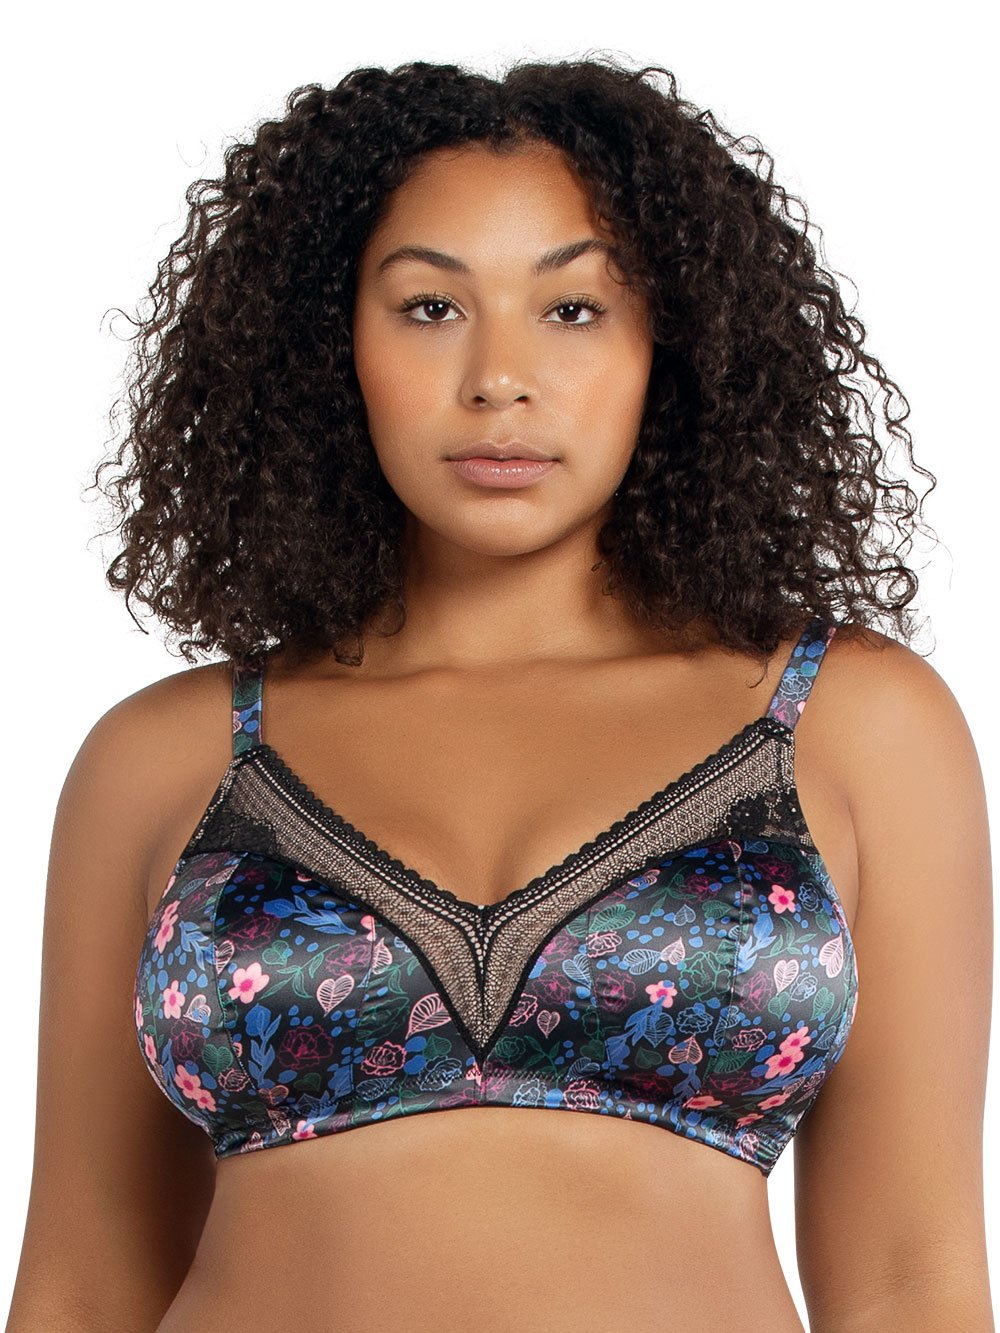 Ladies Black Lace Underwired Non Padded Bra. 32 to 42 & Cup size B